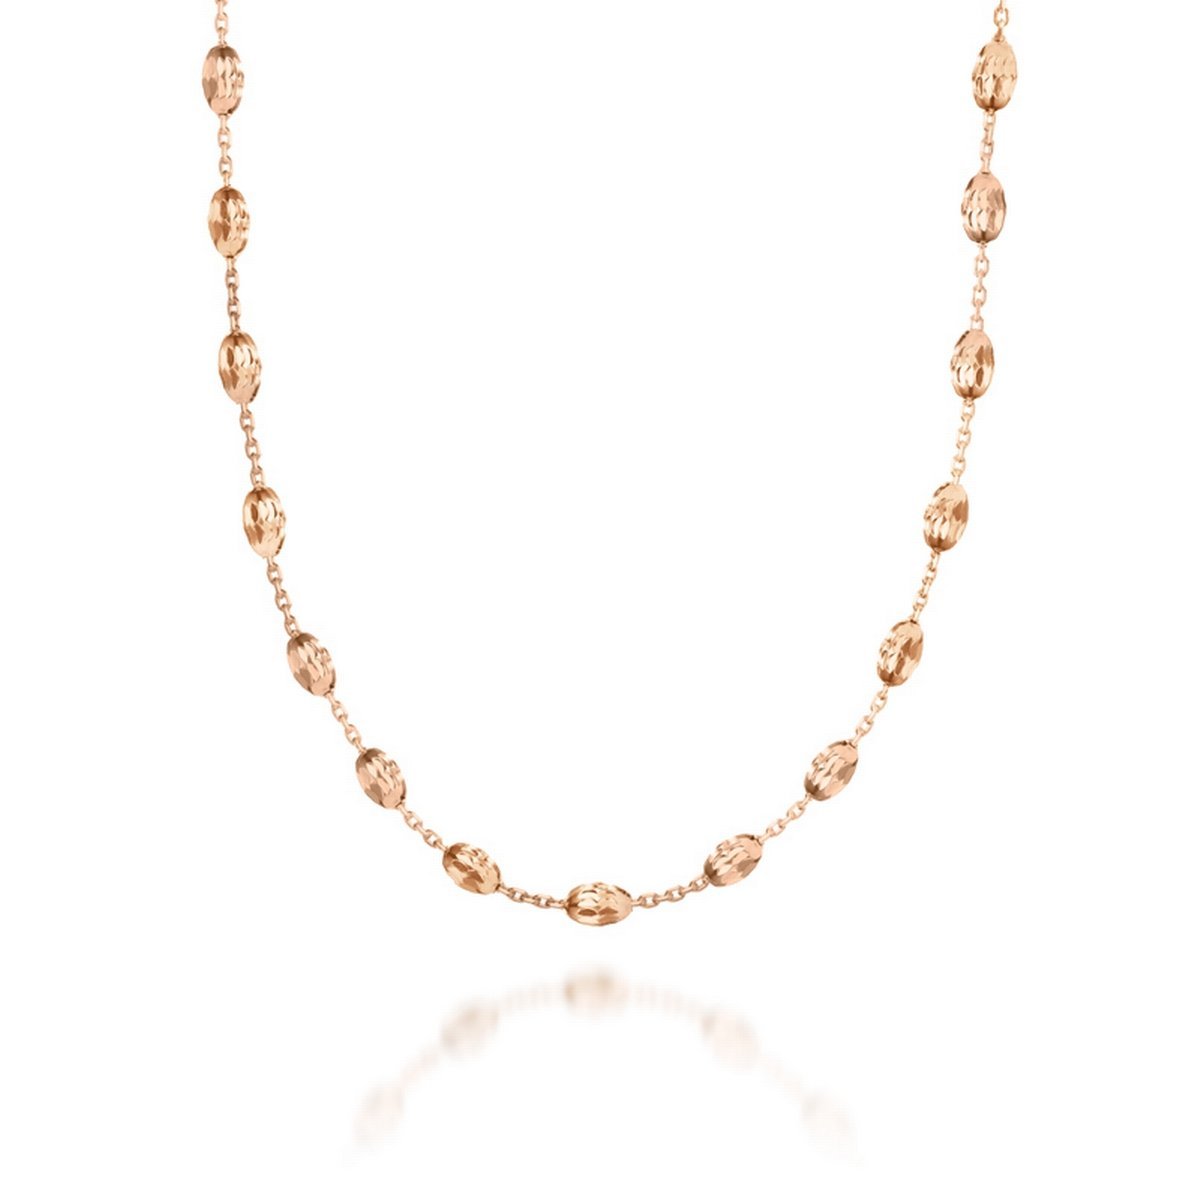 REAL EFFECT rose gold chain. (18 inches) - A & M News and Gifts